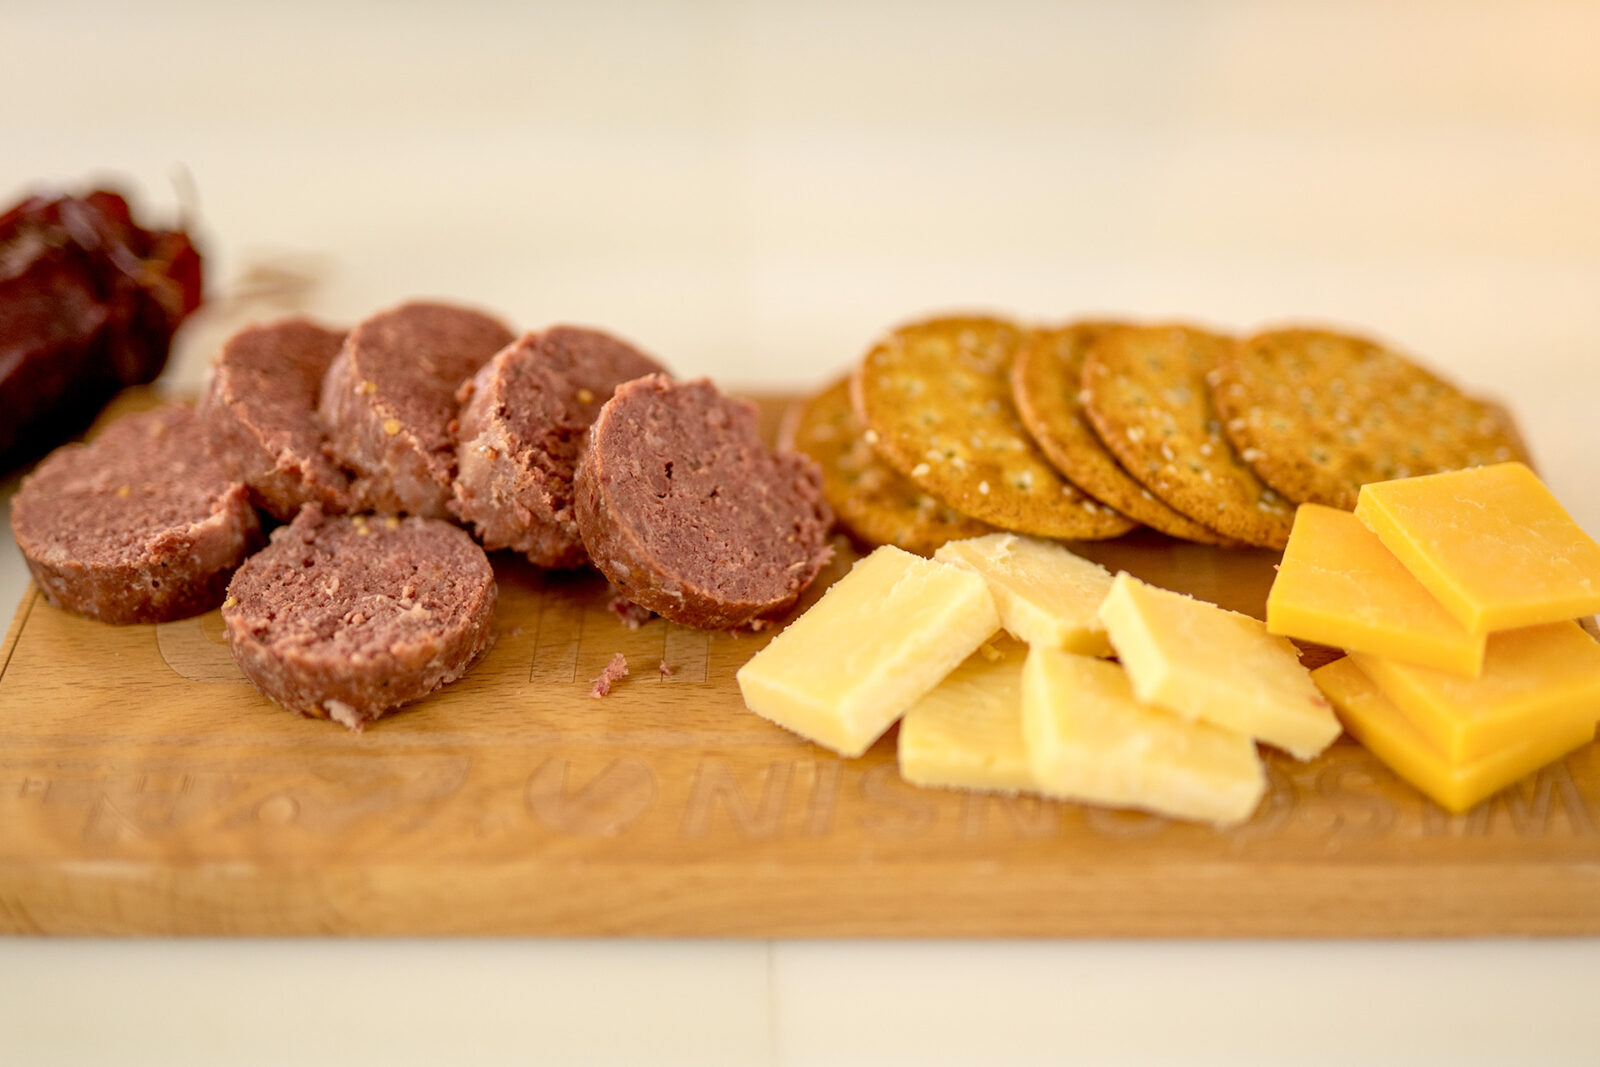 Summer sausage on a charcuterie board alongside slices of cheese and crackers.